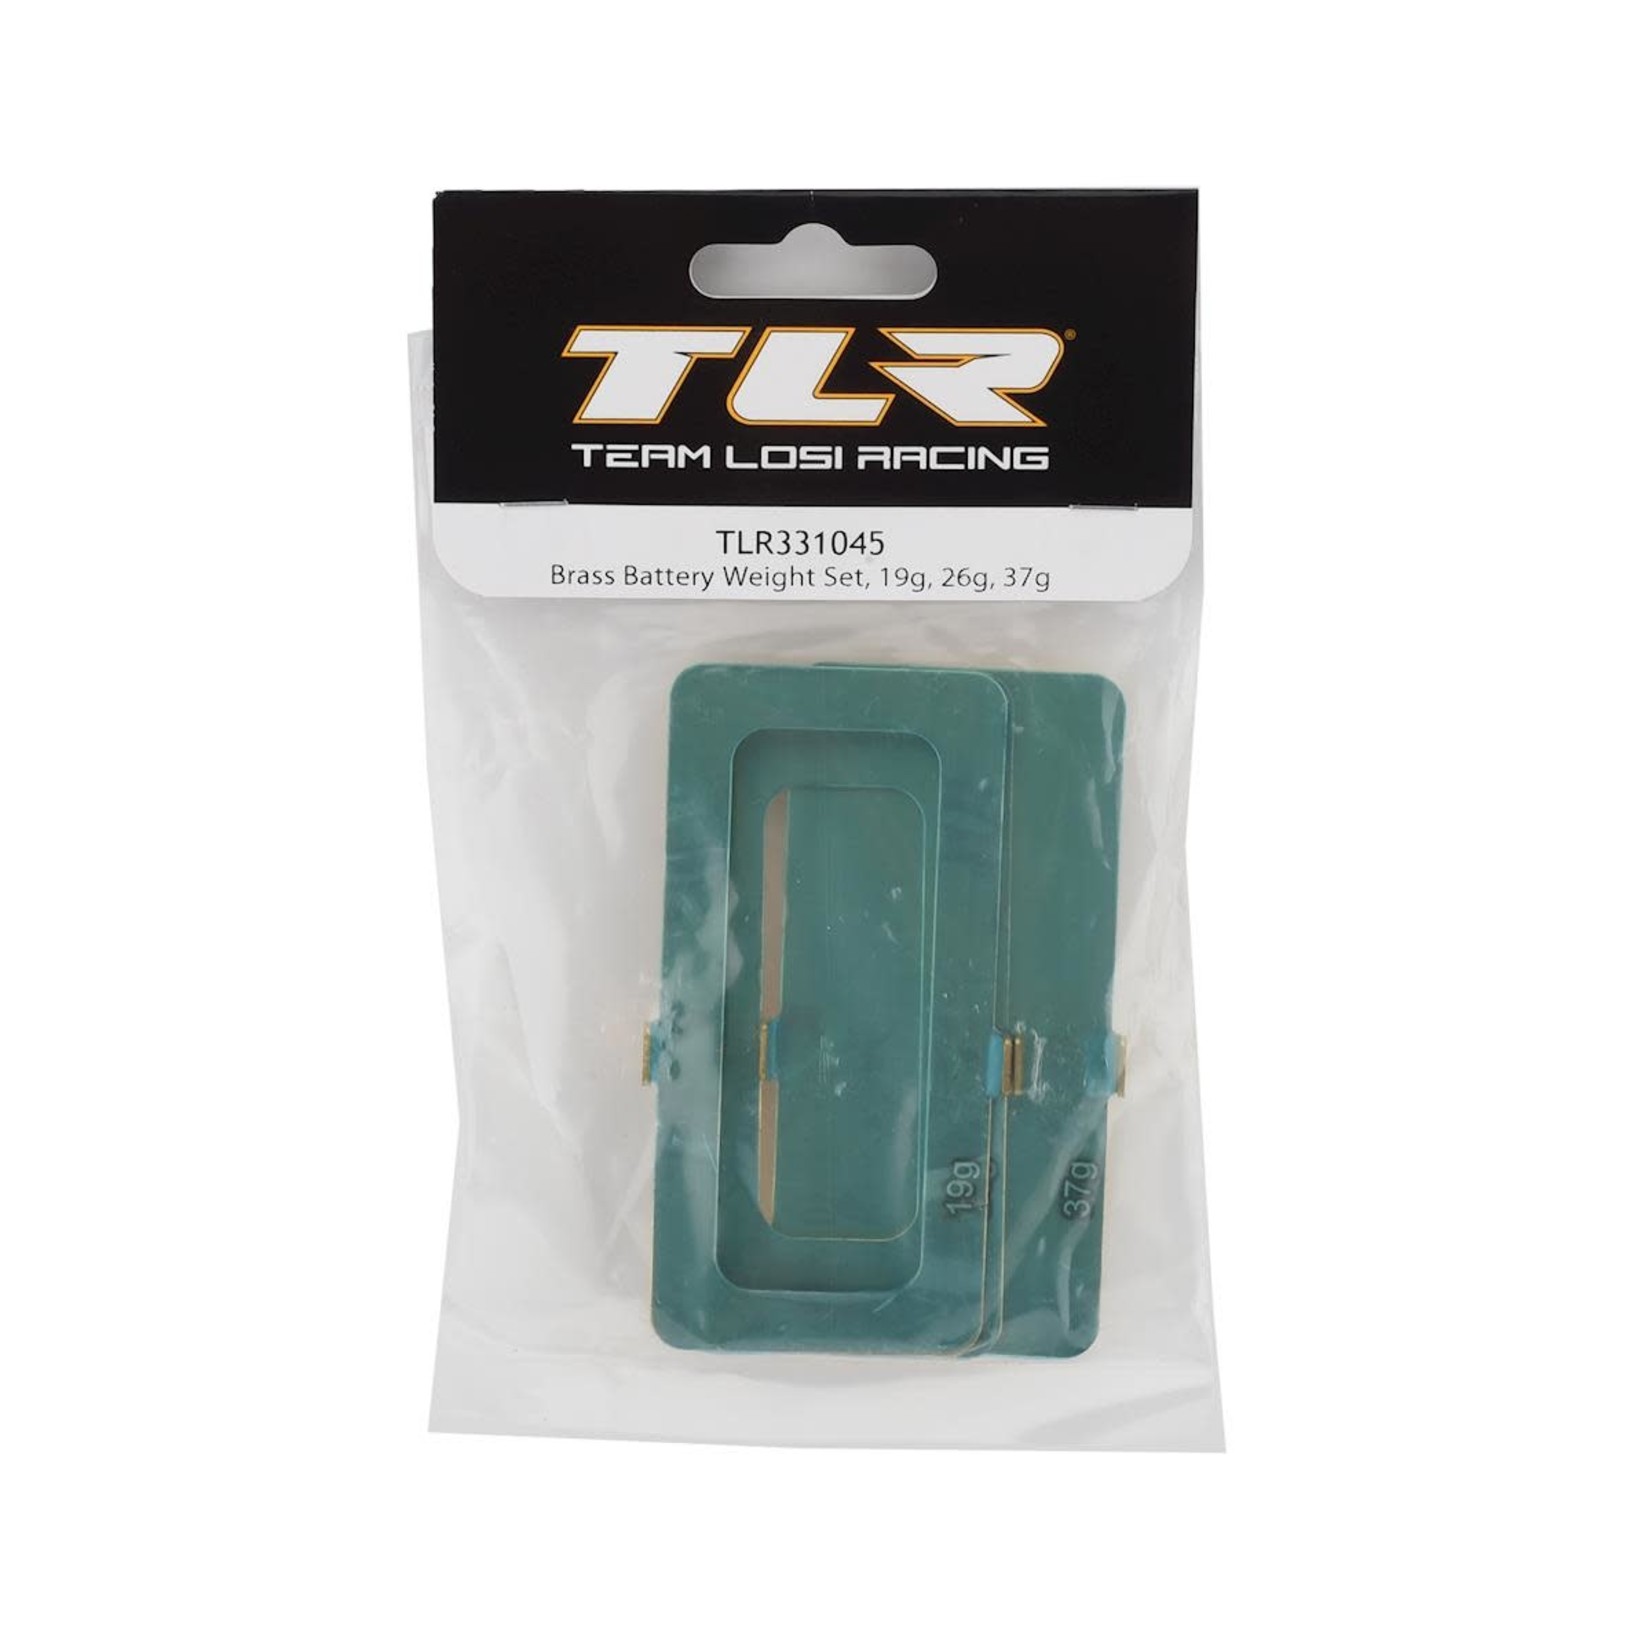 TLR Team Losi Racing 22 5.0 Brass Battery Weight Set (19g, 26g, 37g) #TLR331045